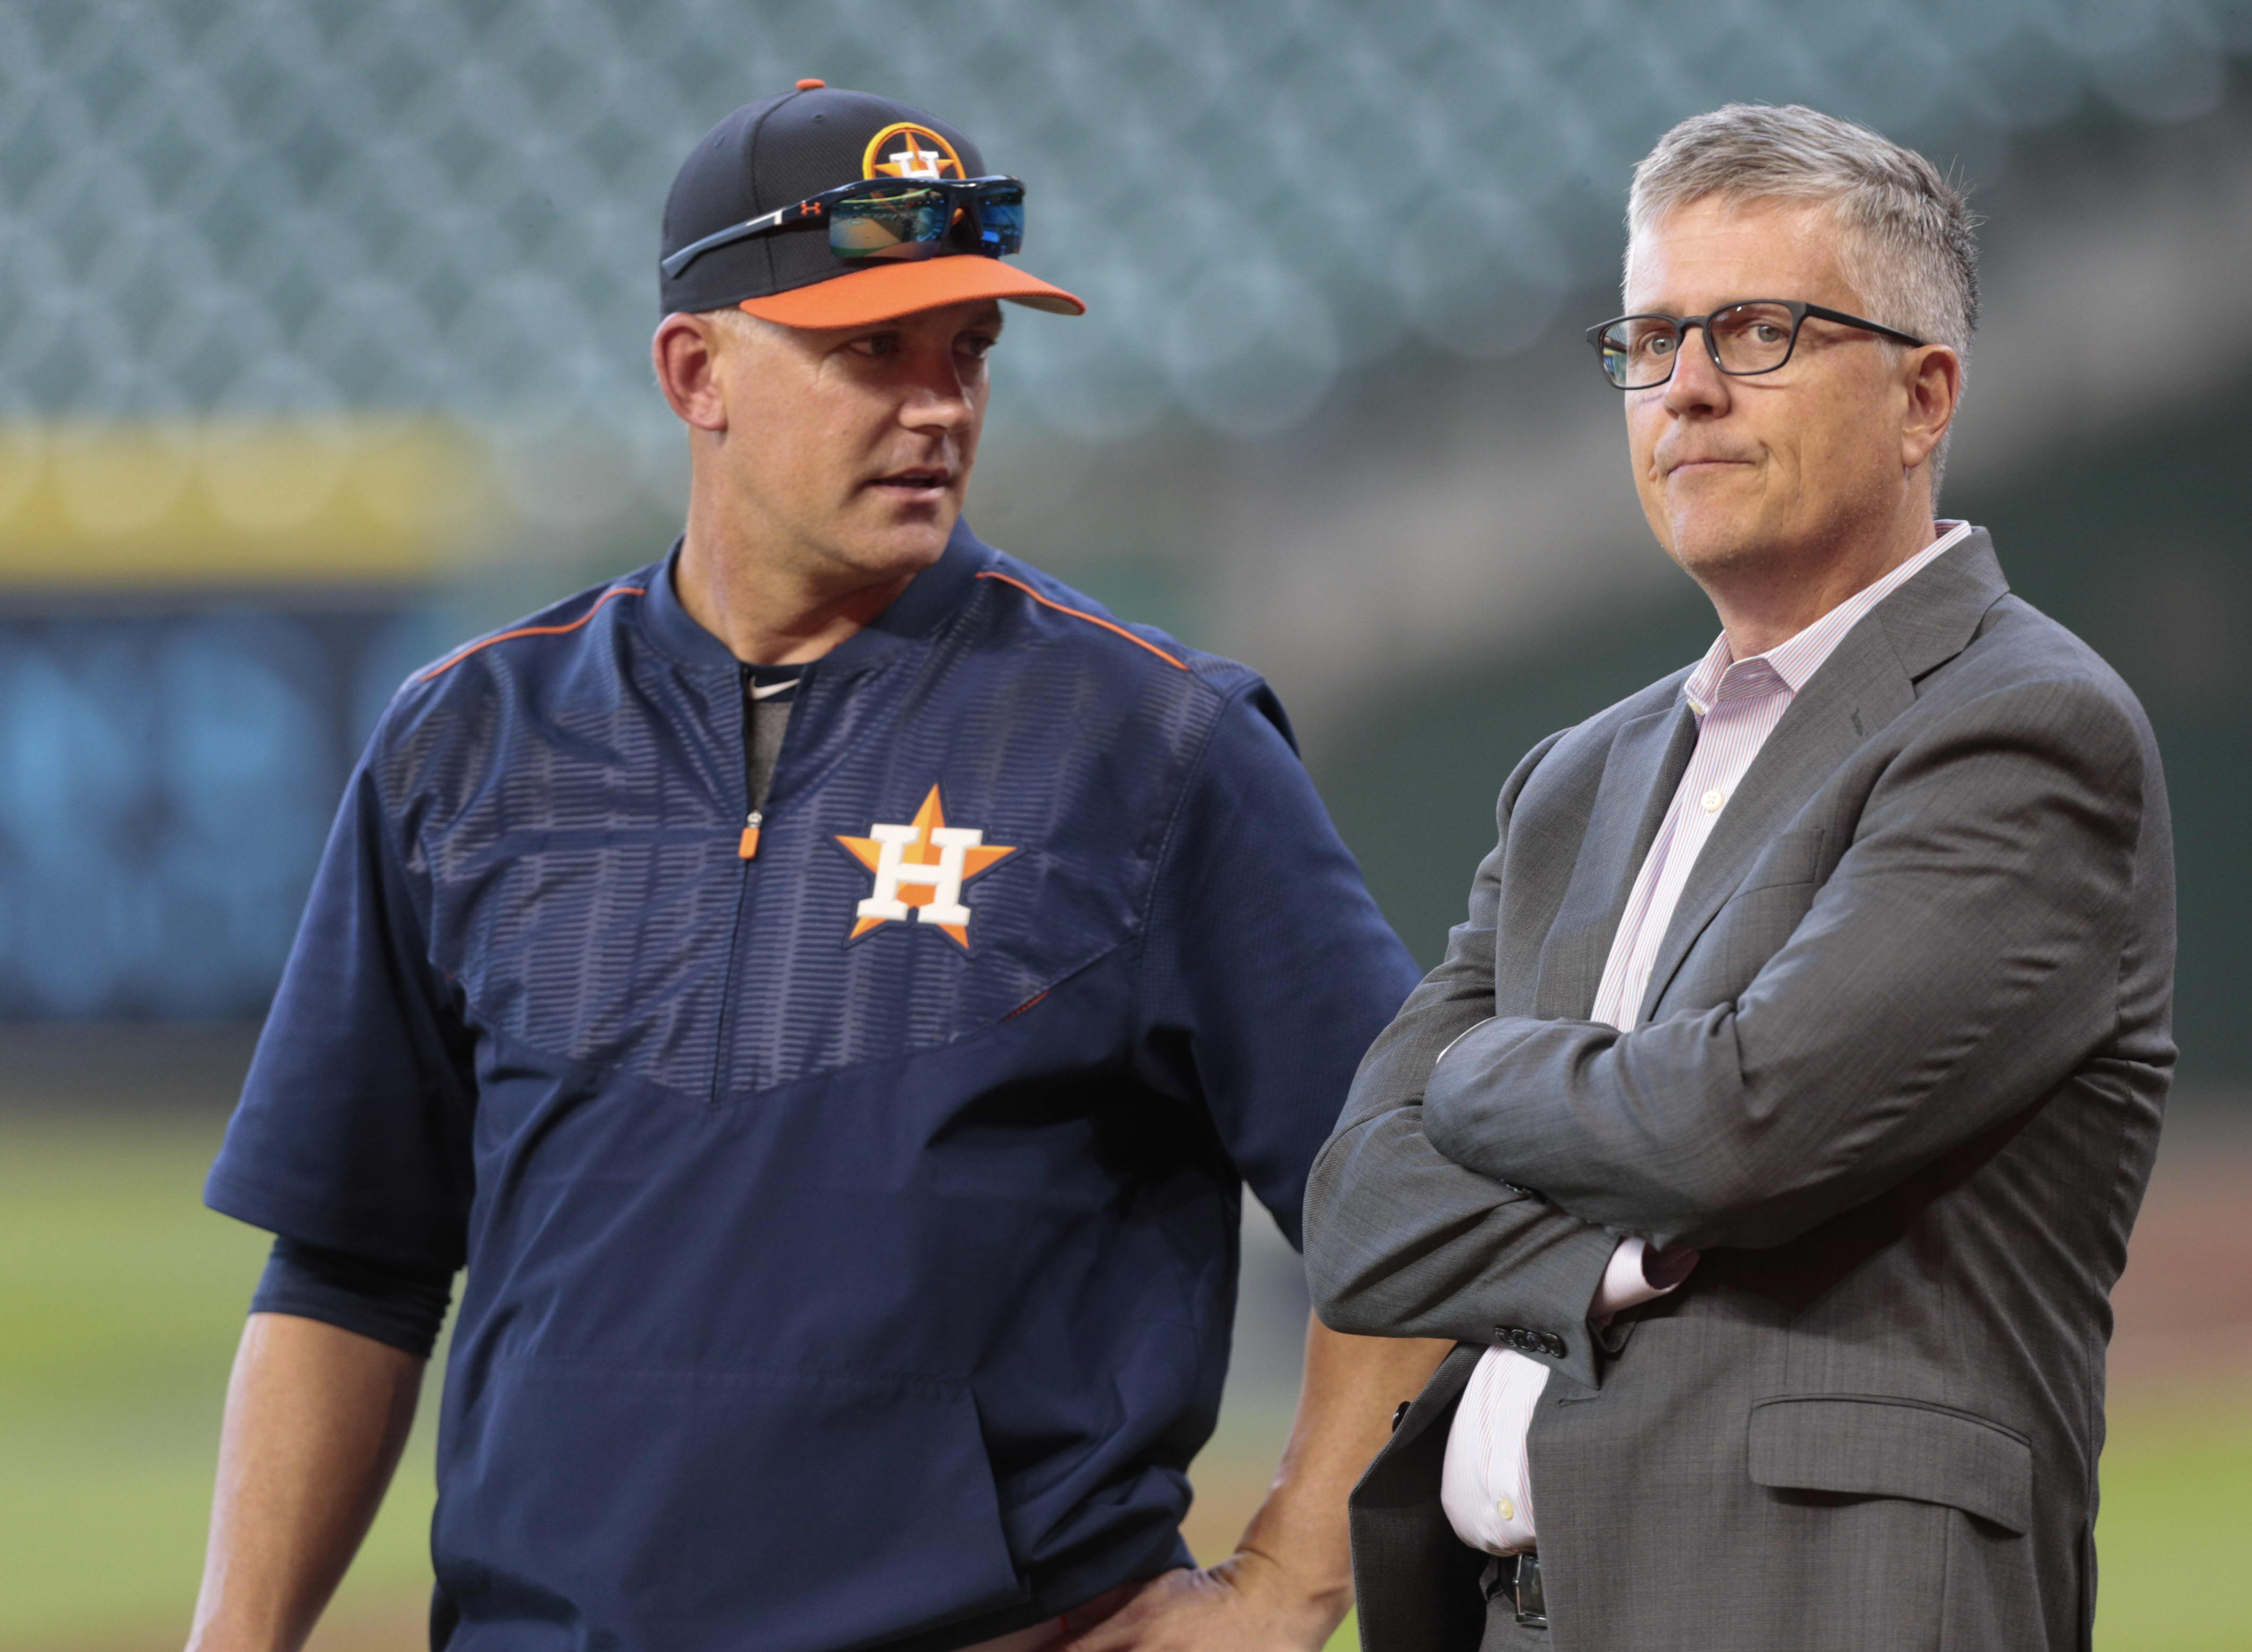 Funny Tweets About Astros Cheating Scandal